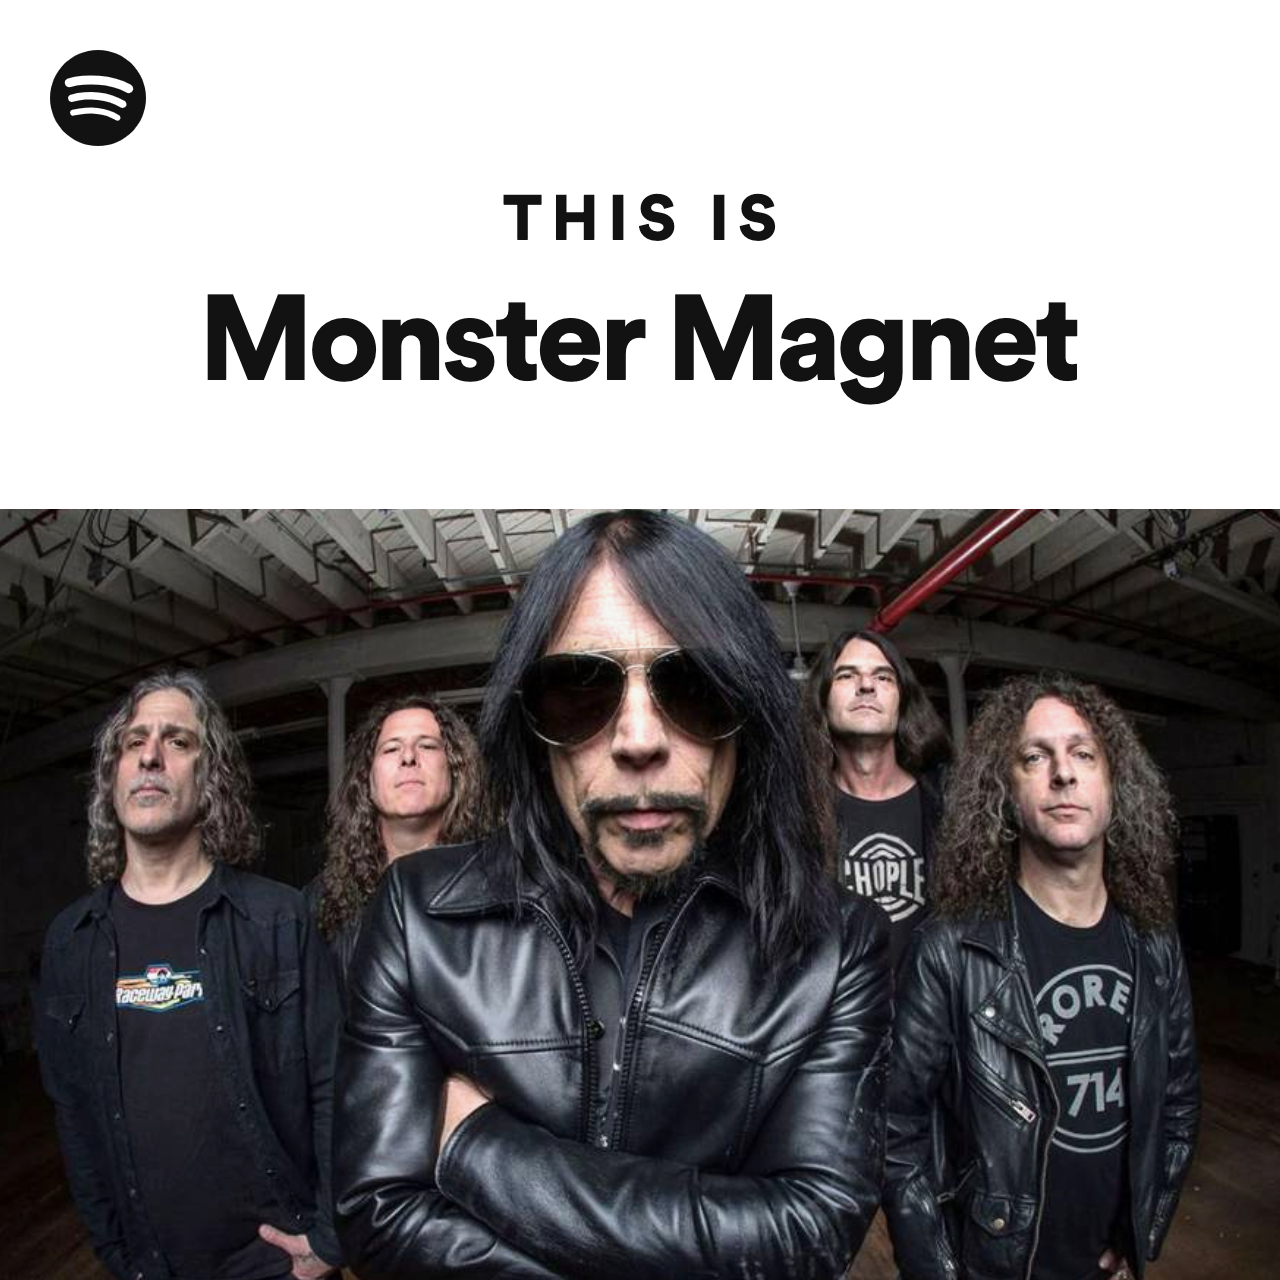 This Is Monster Magnet - playlist Spotify Spotify